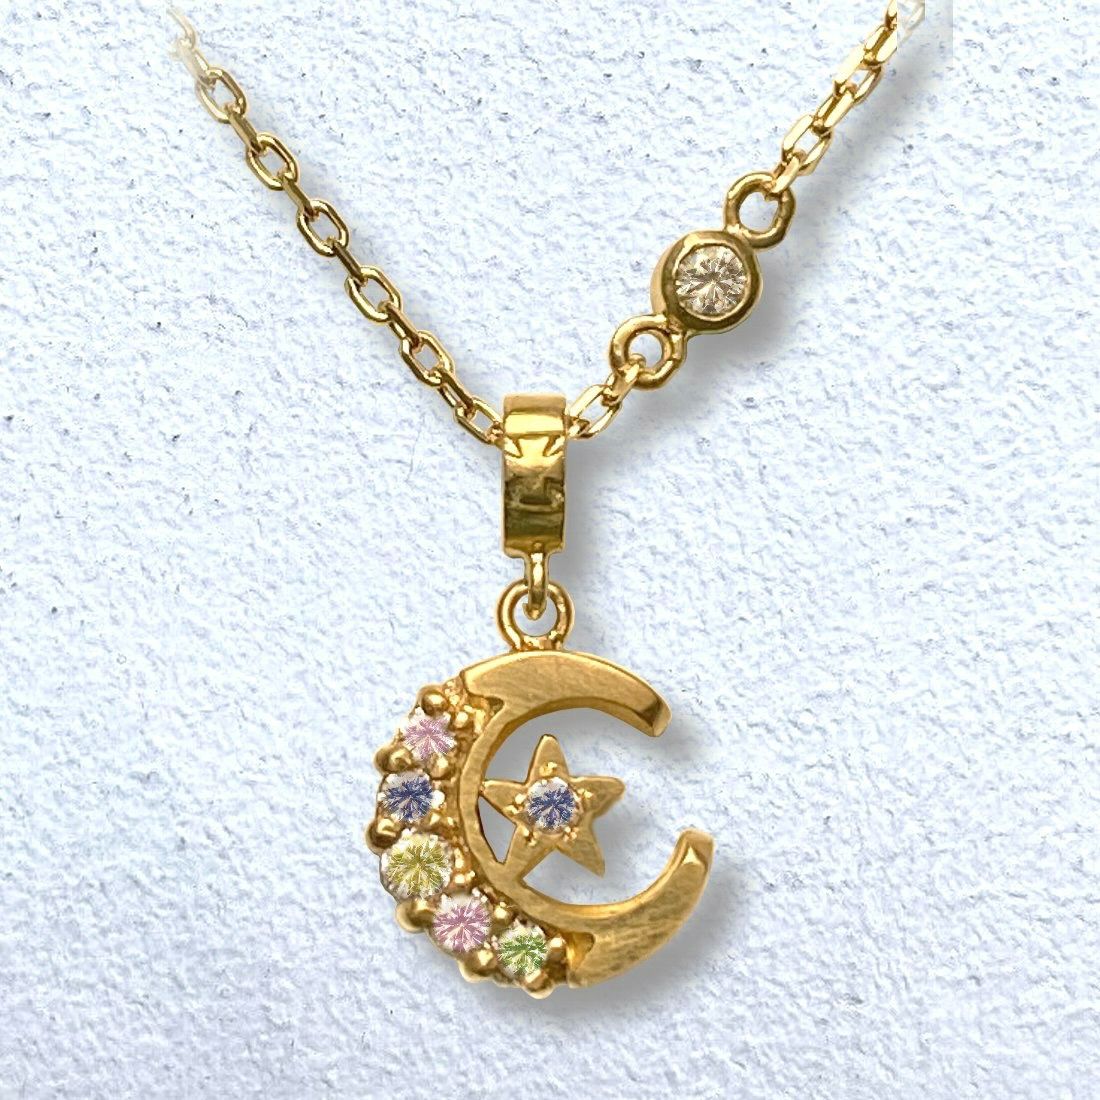 PETITE CRESCENT MOON NECKLACE 18k Yellow Gold / Multi Color 